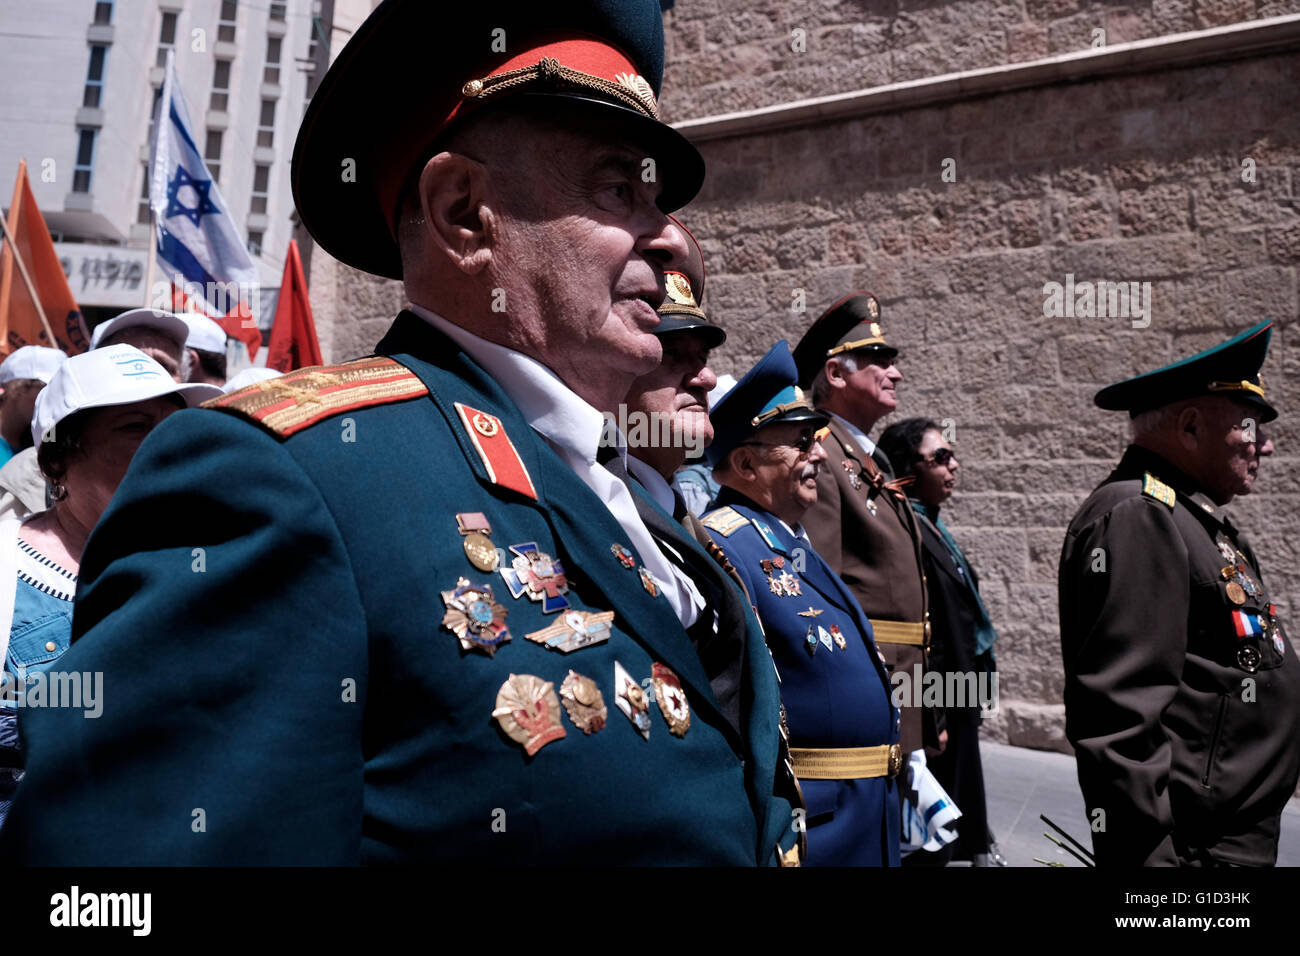 Soviet Jewish World War II veterans with medals pinned in their old uniforms take part in a parade in honor of 71 years since the Allies’ victory over Nazi Germany in the center of Jerusalem Israel Stock Photo